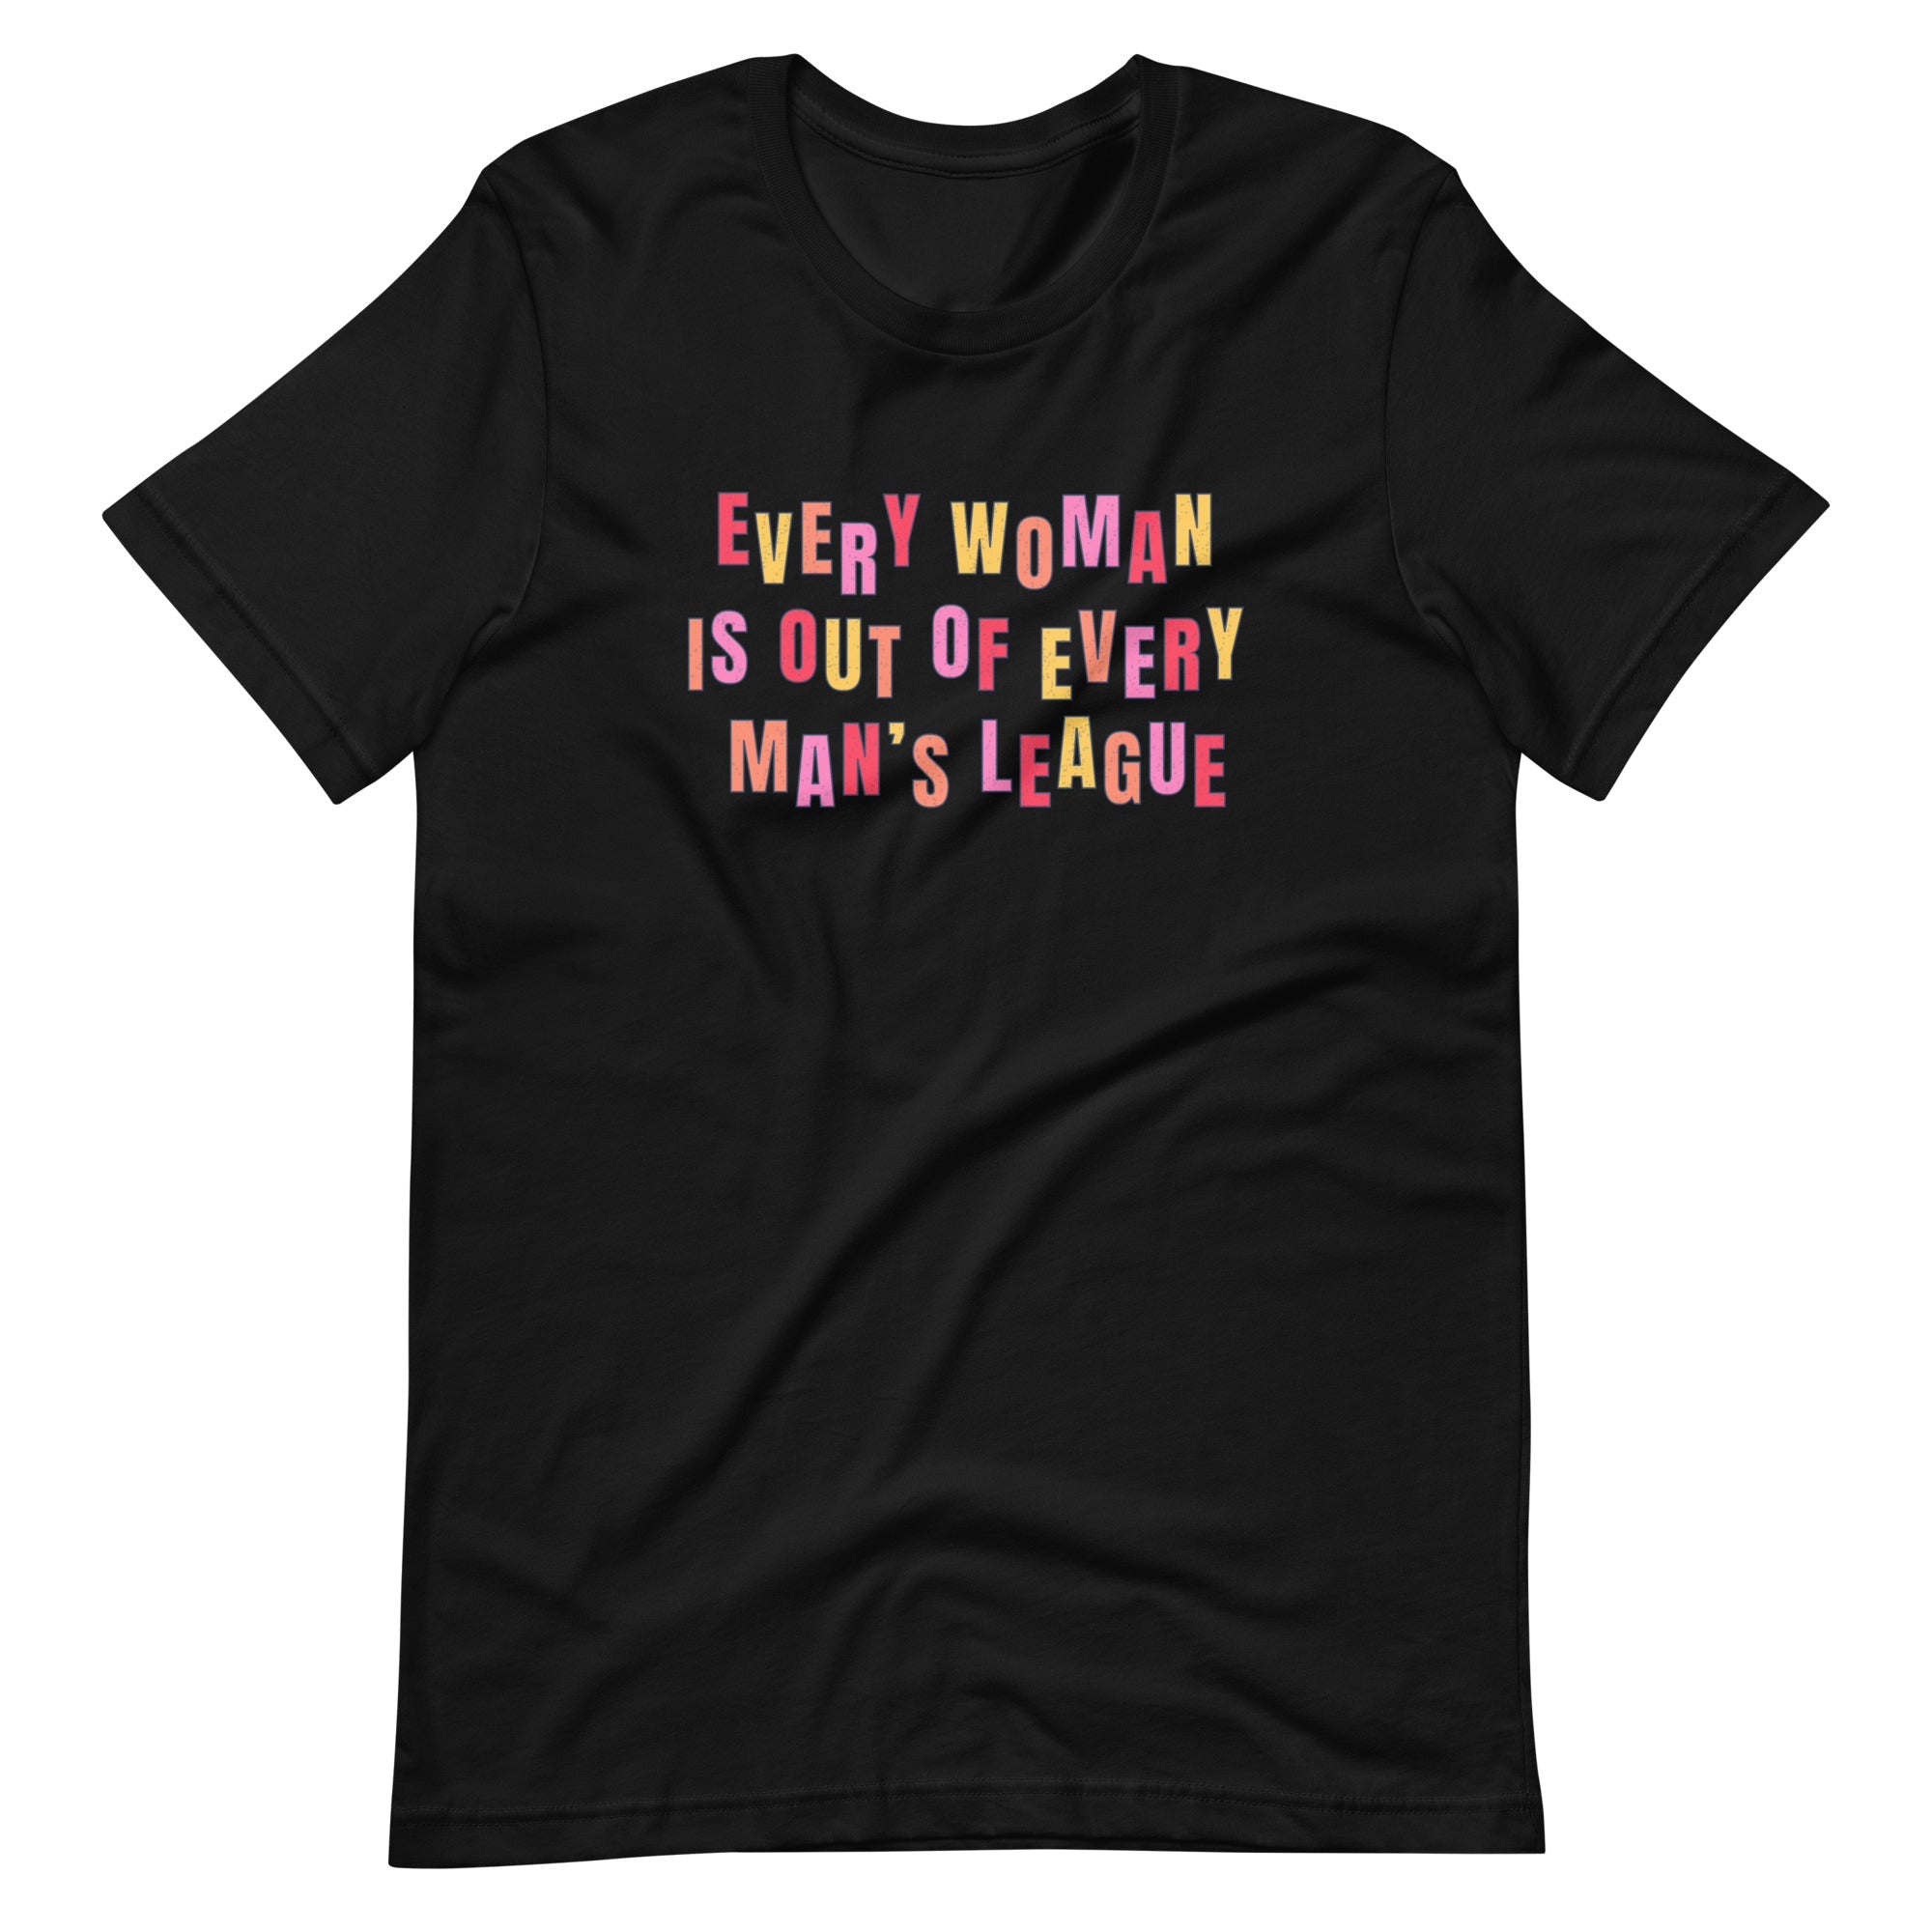 Black feminist t-shirt with the phrase 'Every Woman is Out of Every Man’s League,' celebrating empowerment and gender equality